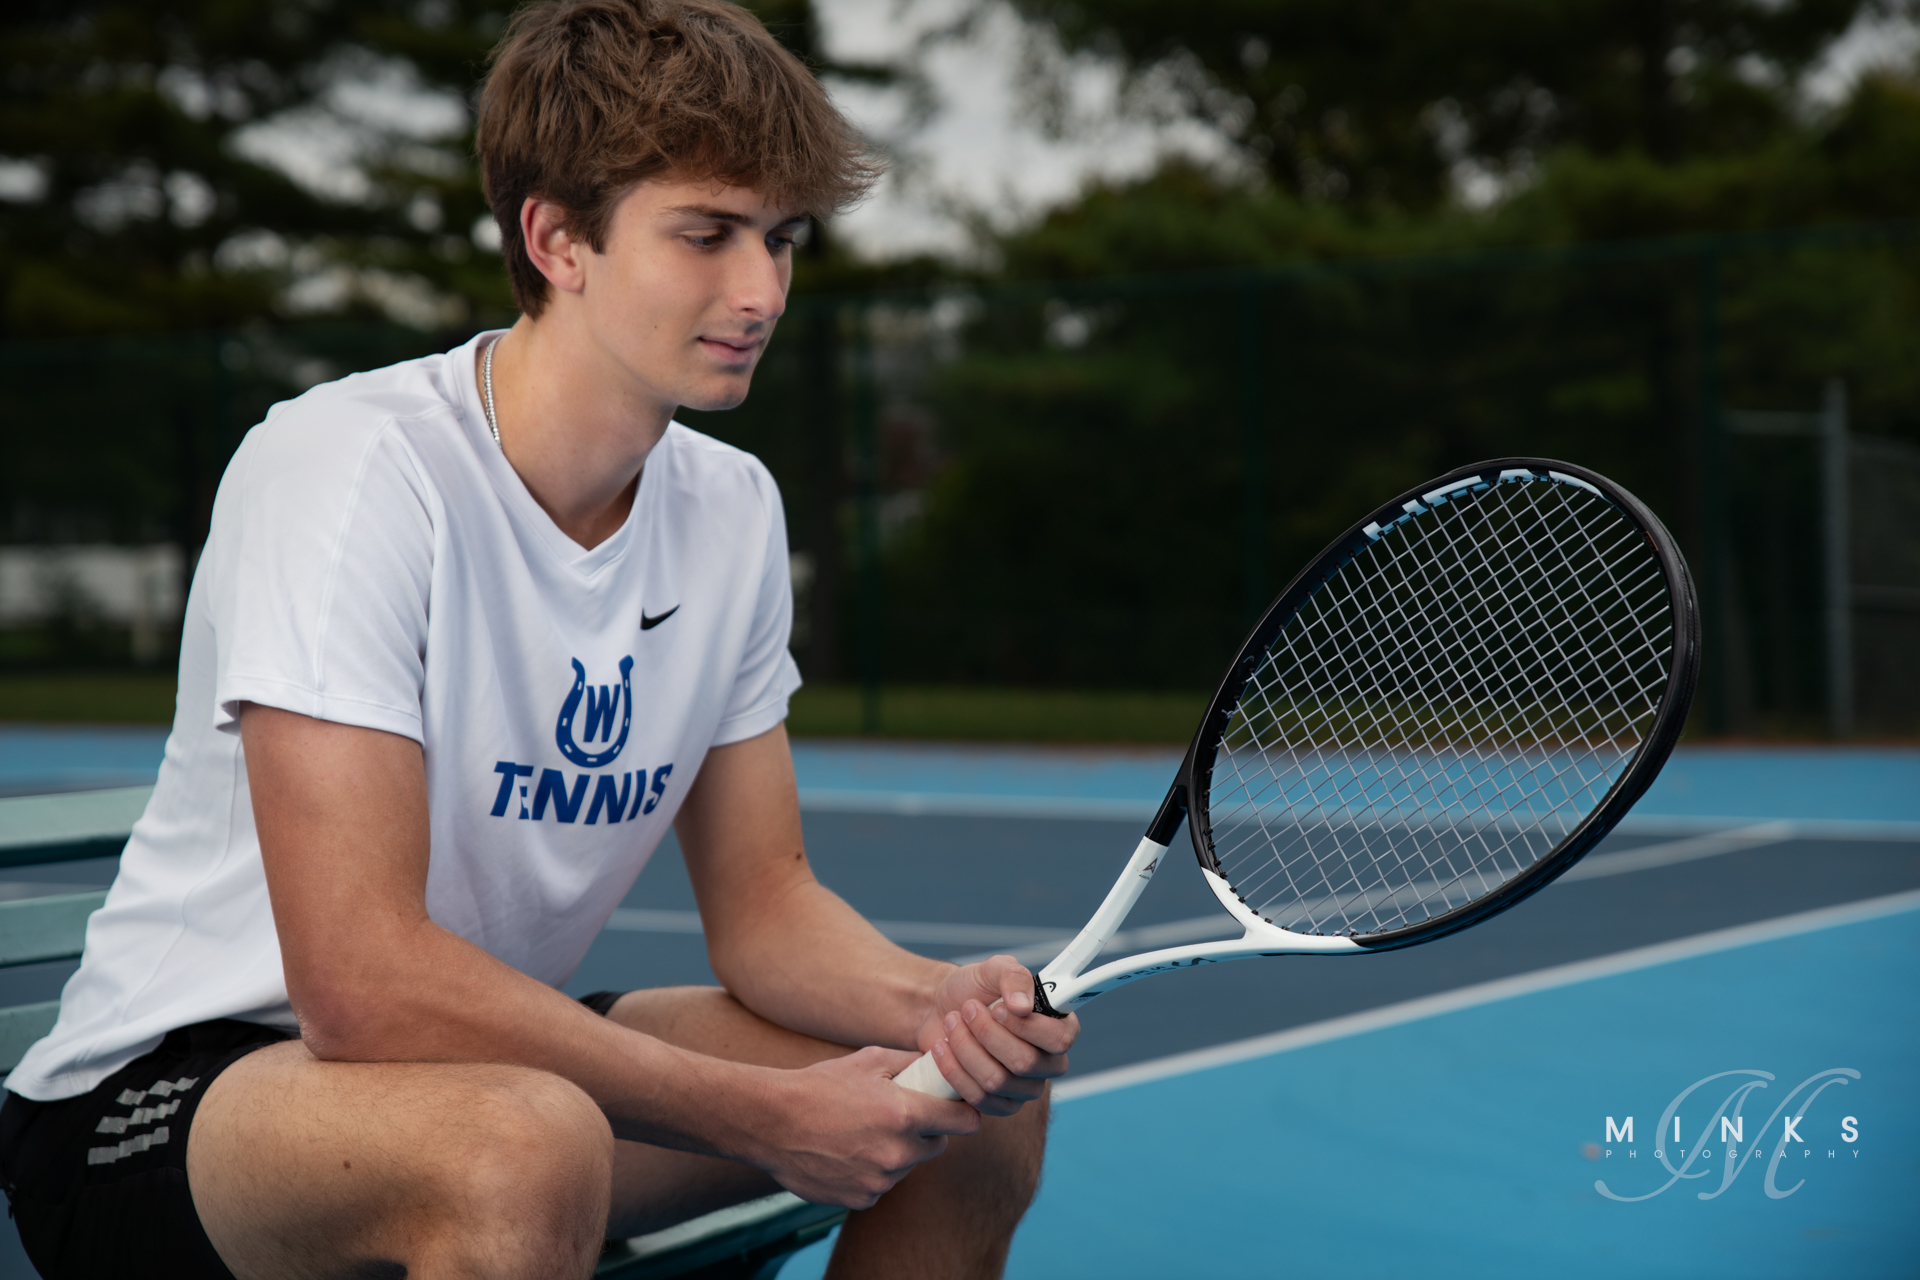 high school senior guy tennis plying sitting on a bench looking at his racket